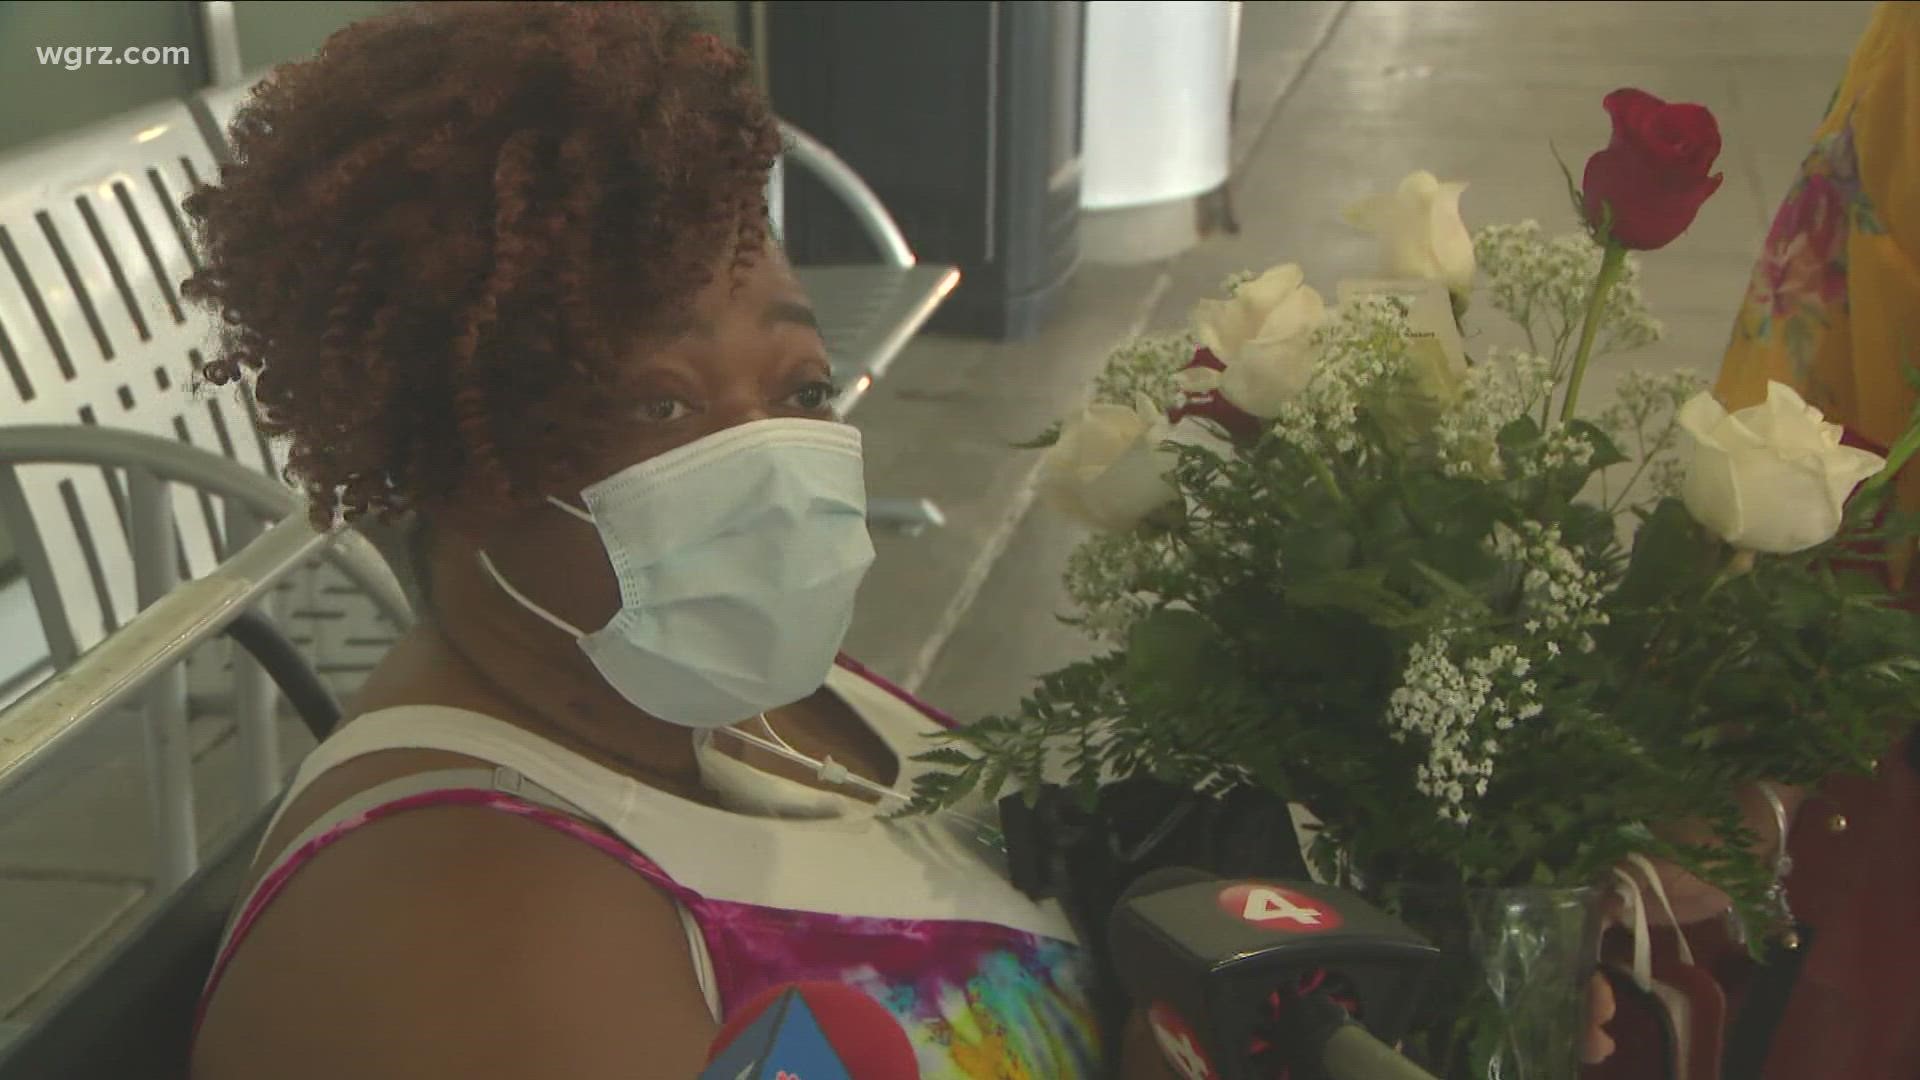 Ericka Morse is celebrating her 46th birthday at home after surviving 23 days on a ventilator.